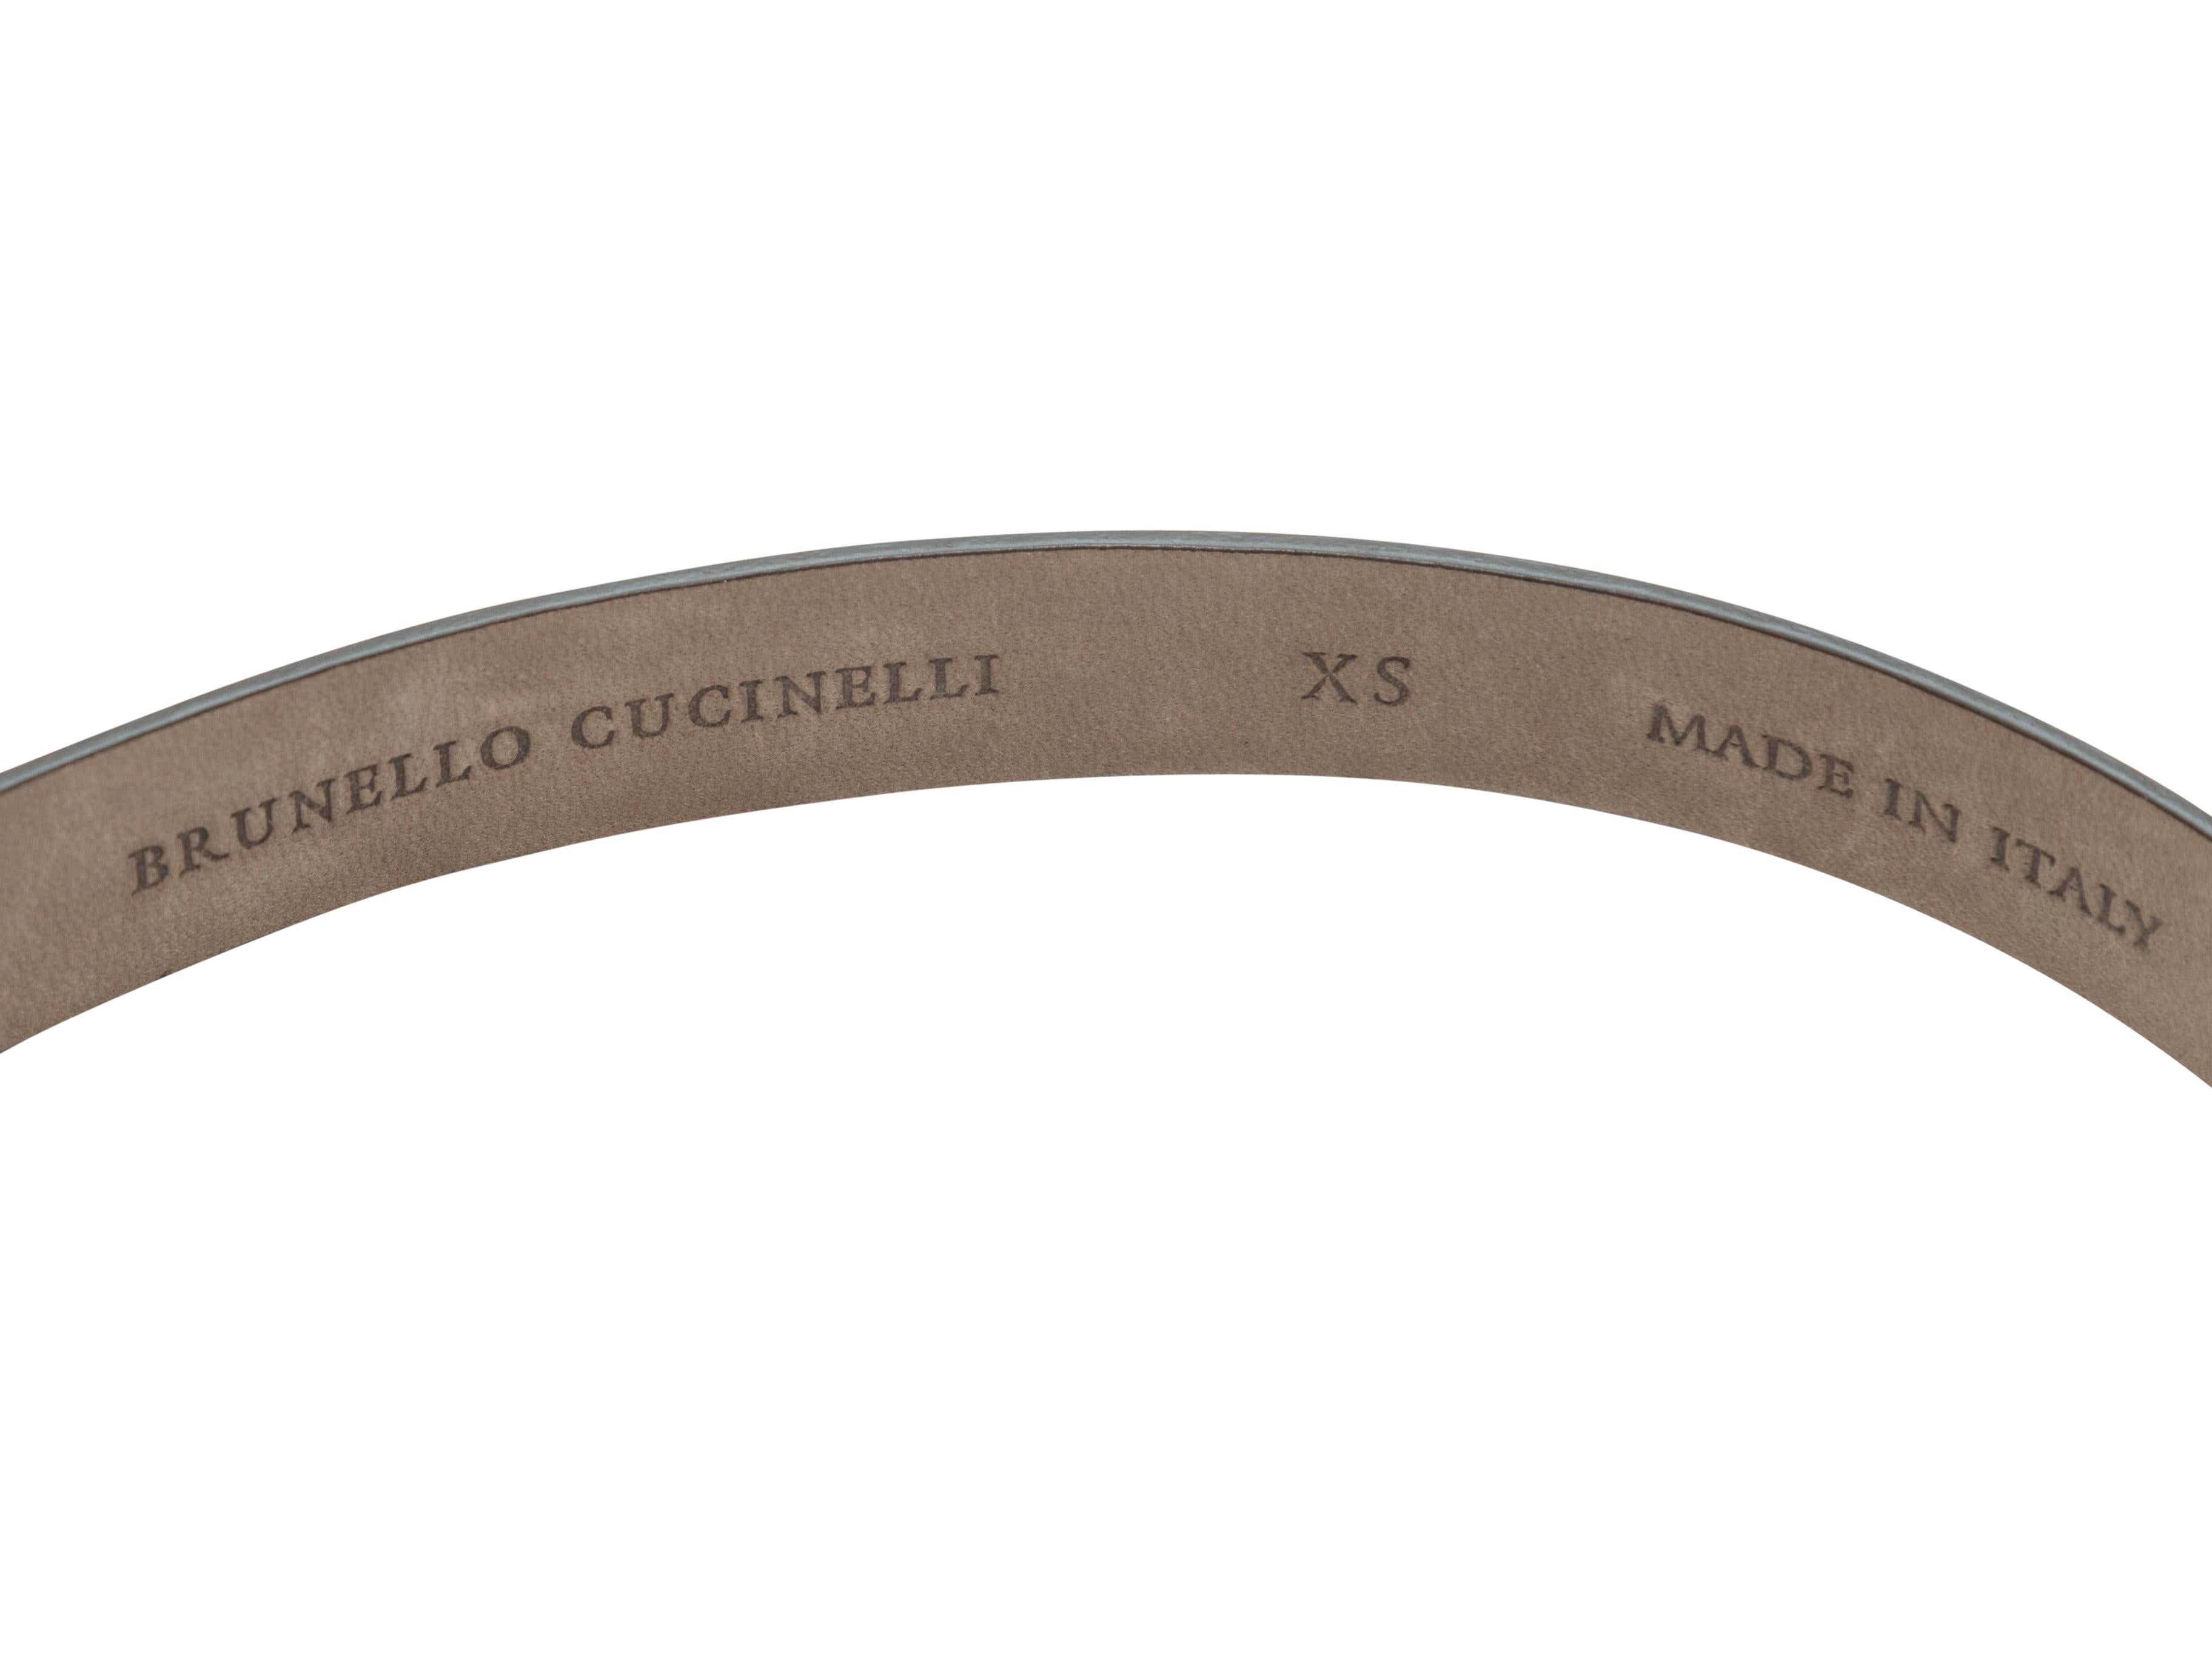 Product Details: Brown snakeskin belt by Brunello Cucinelli. Peg-in-hole closures at front. 47